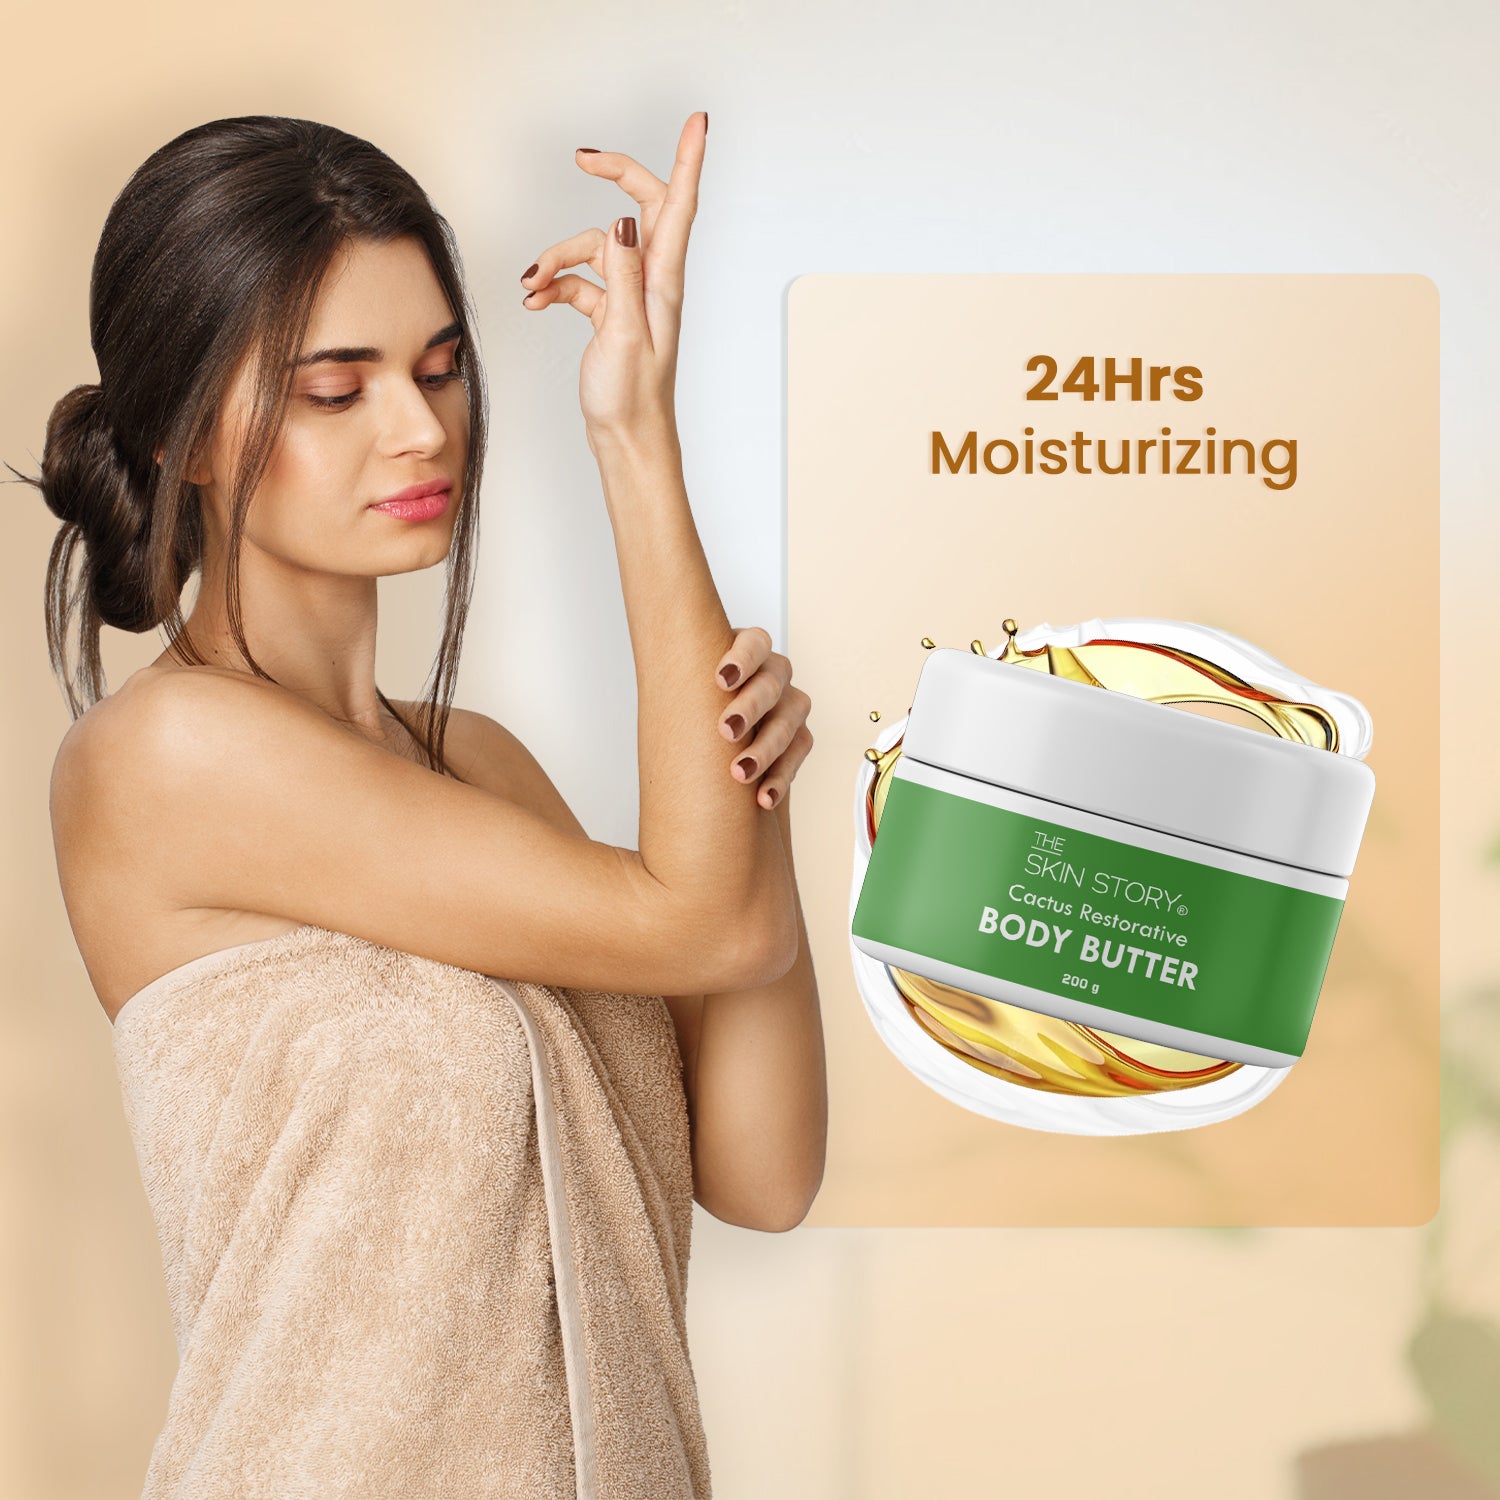 The Skin Story Extra Moisturising Body Butter | Fast Absorbing & Non Tacky | Enriched with Cactus & Cocoa Butter | For Dry Skin | 200gm